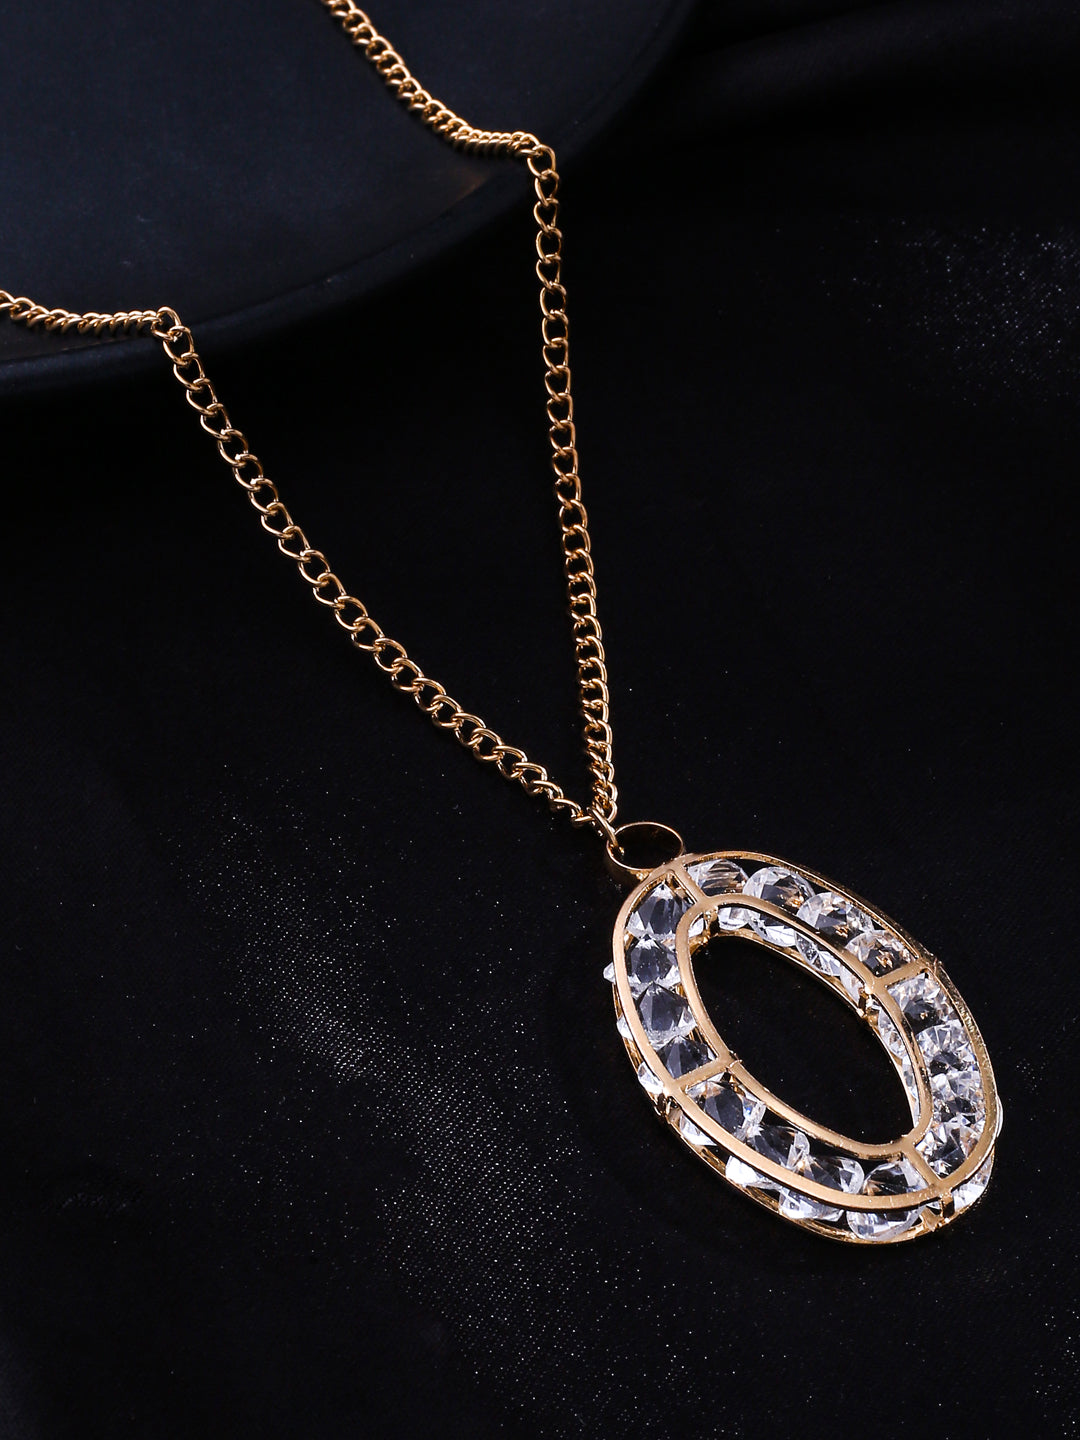 Women's Gold-Plated Oxidised Bohemian Necklace - NVR